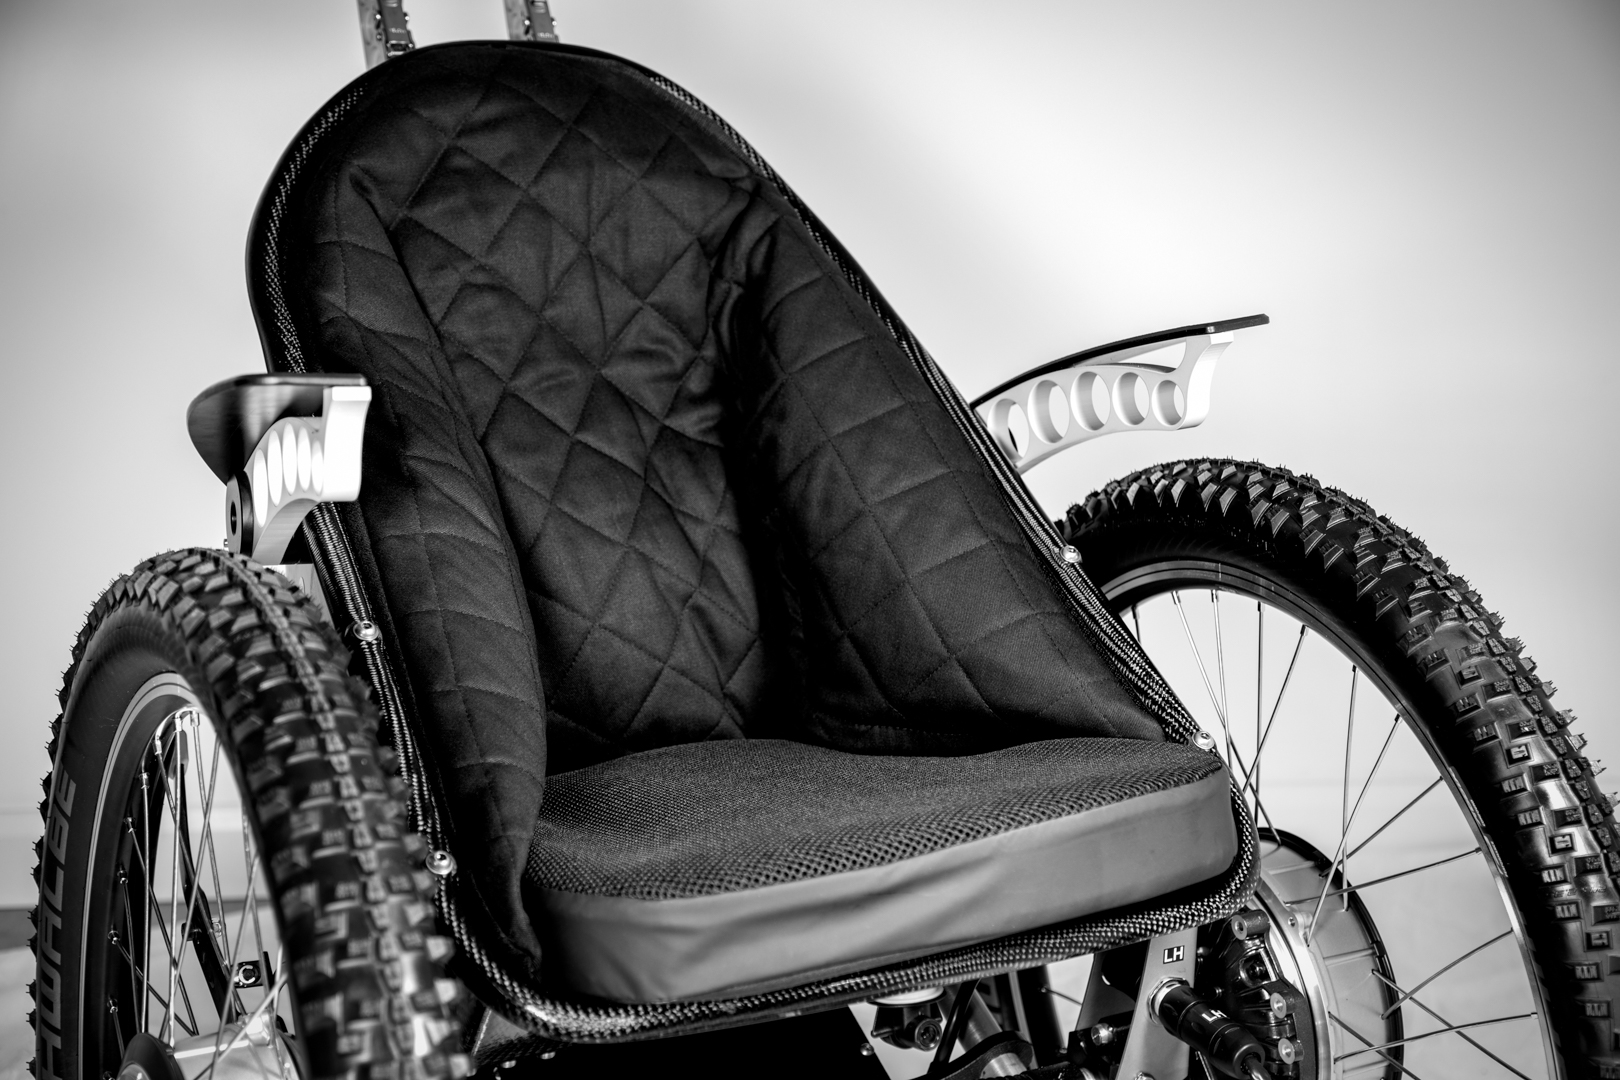 Hyperforma seat lining and foam cushion for children in Trekinetic wheelchair